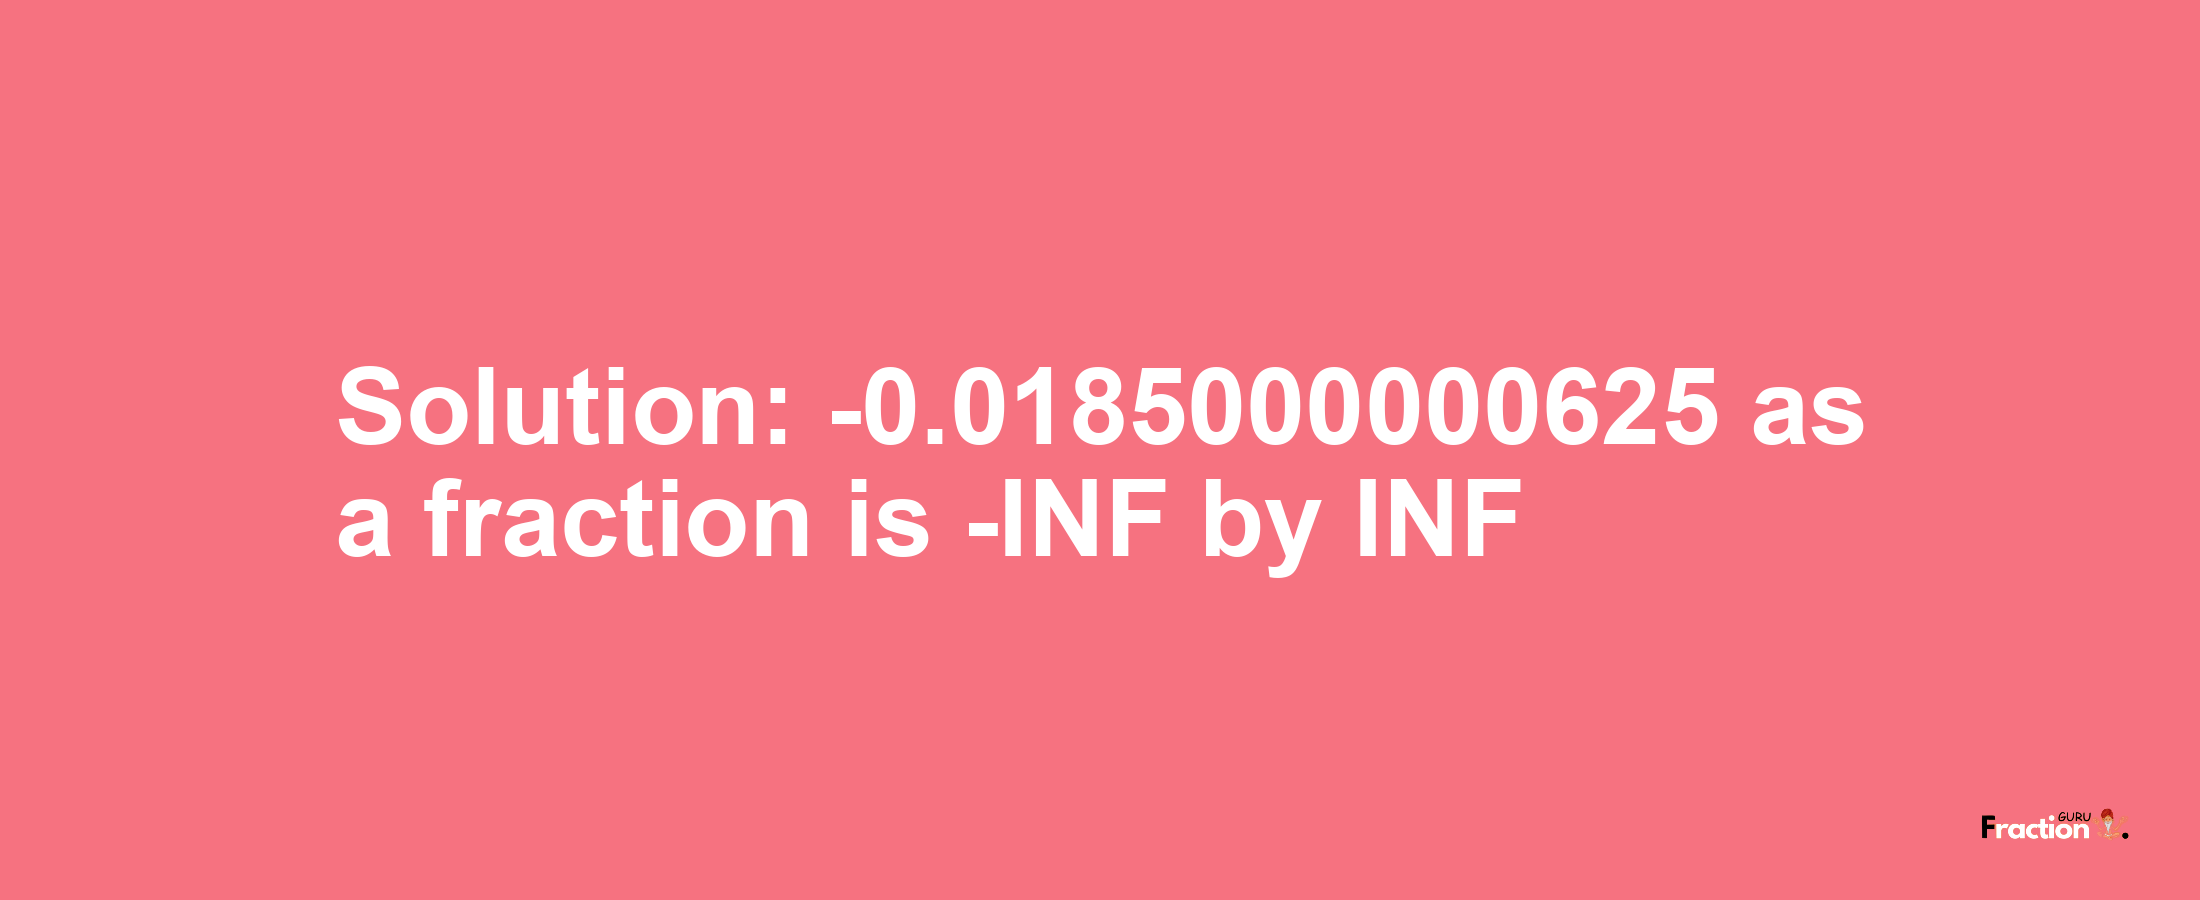 Solution:-0.0185000000625 as a fraction is -INF/INF